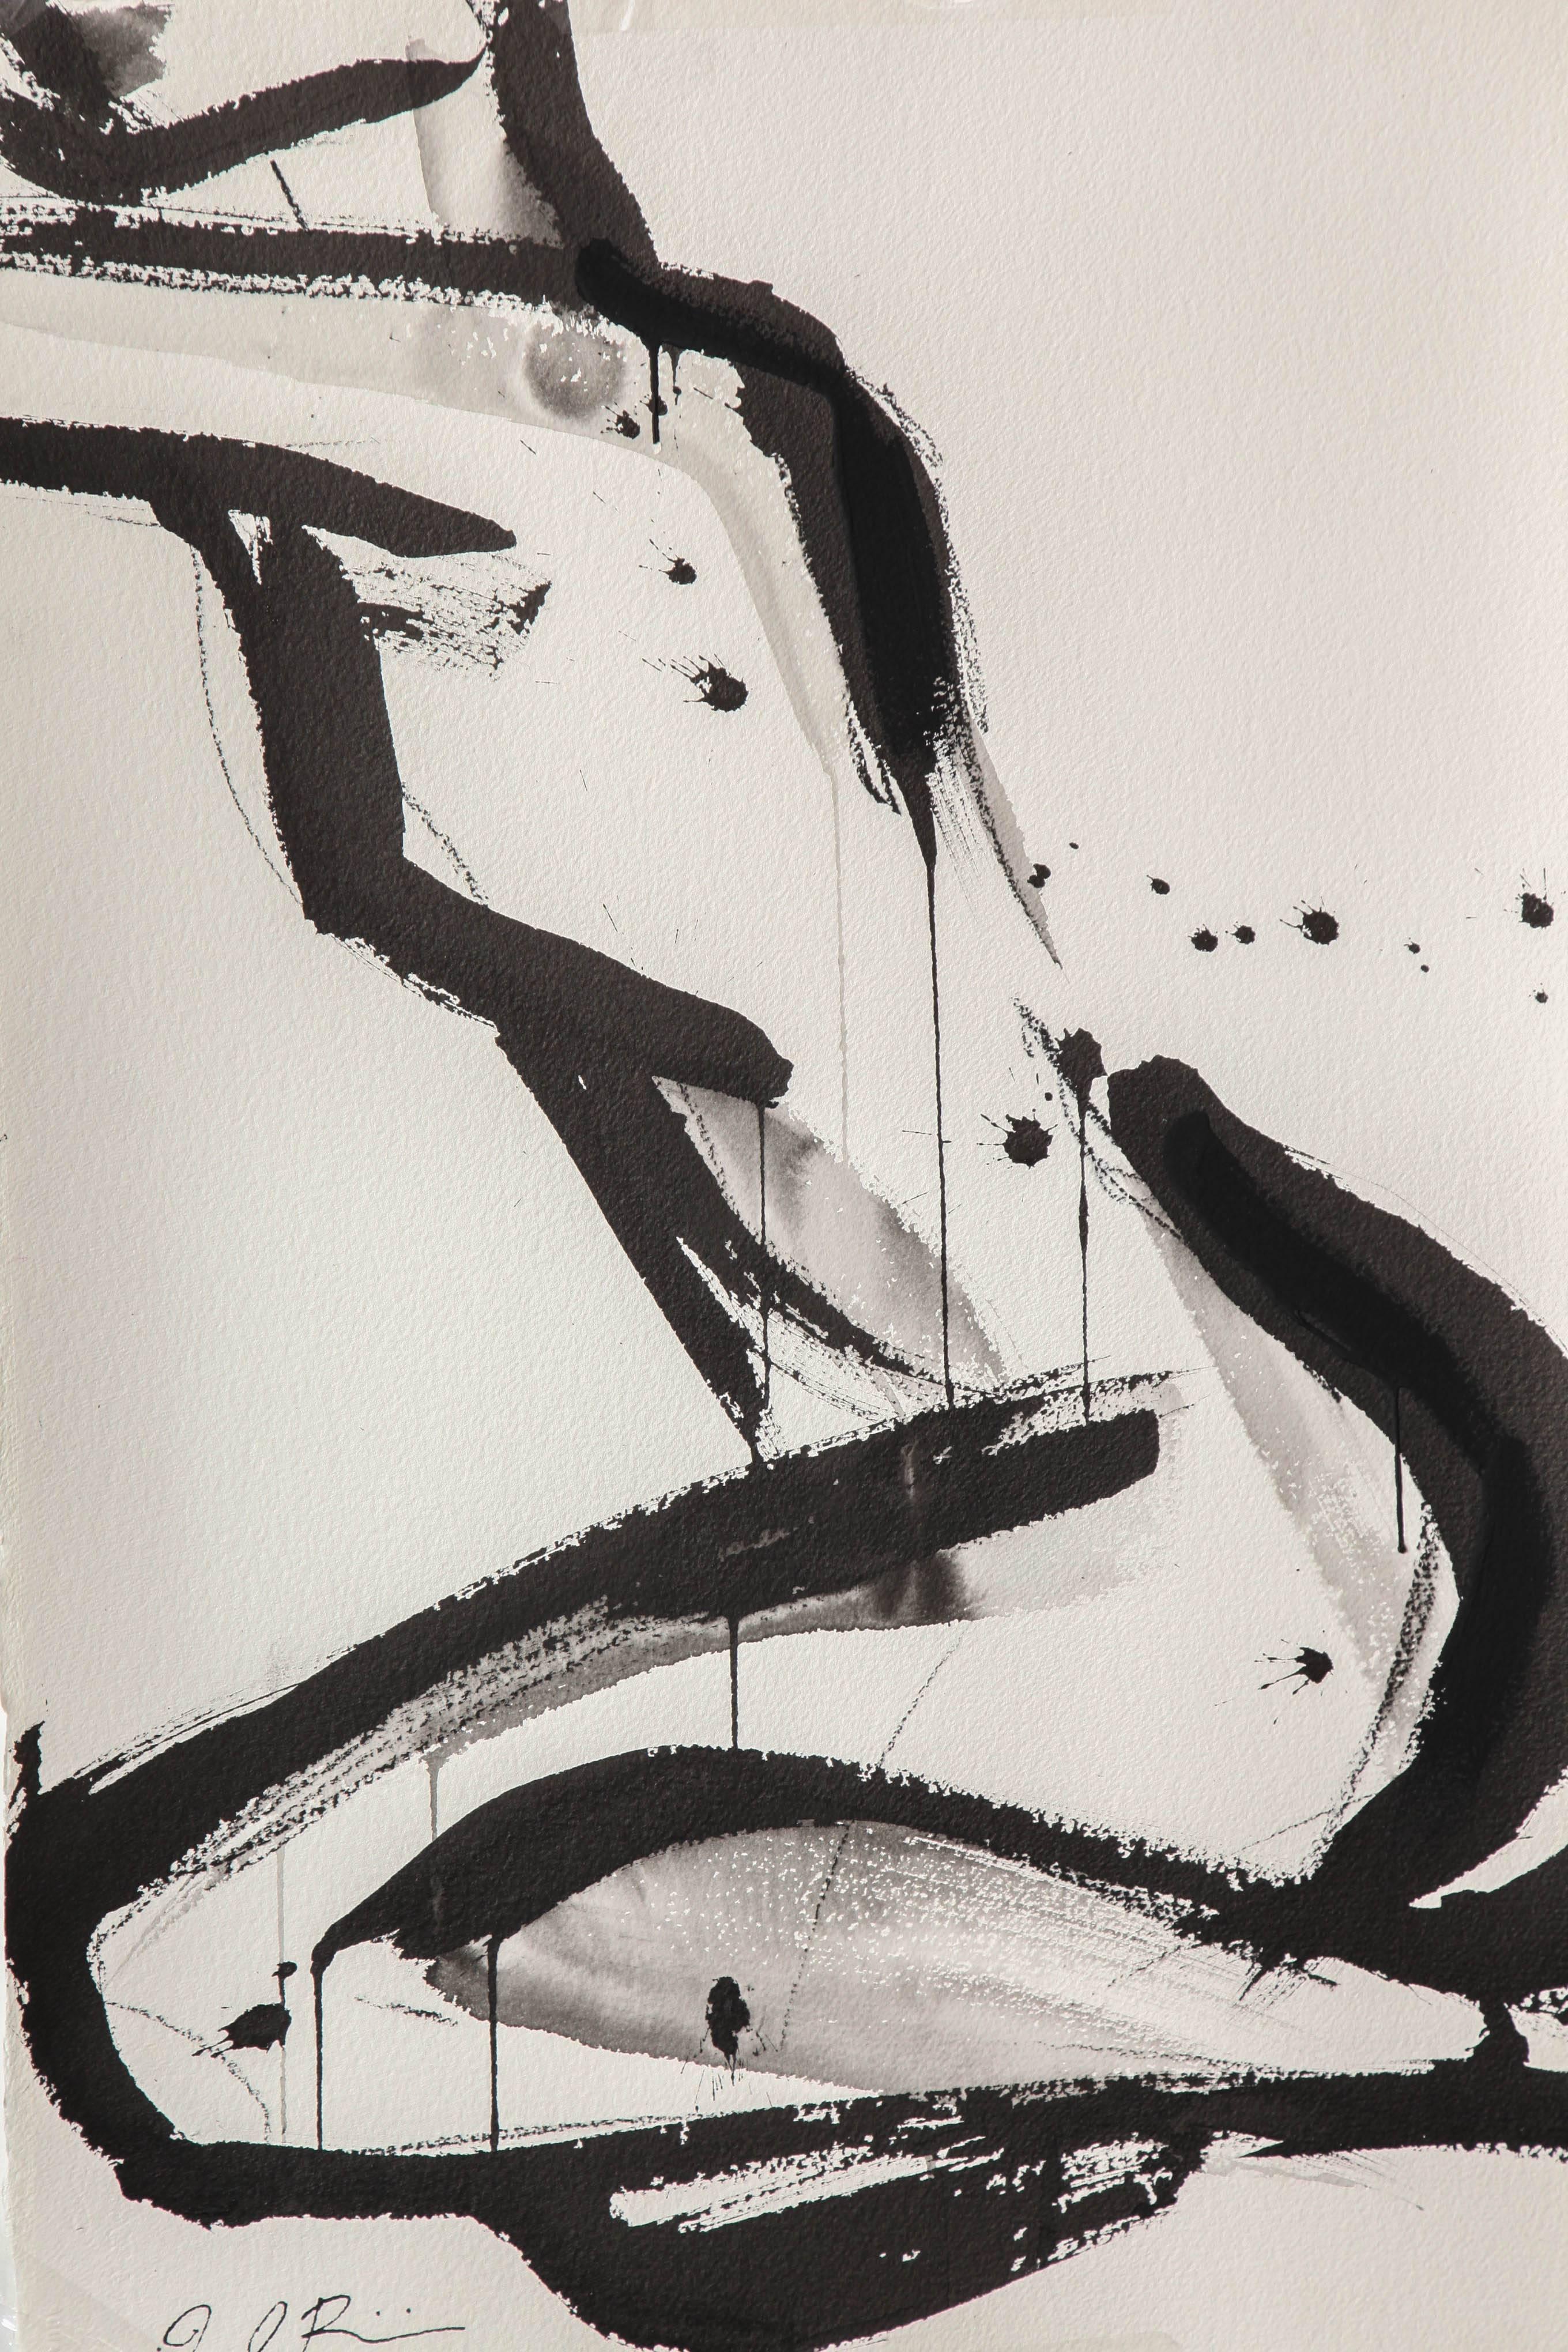 Beautiful nude painting by Jenna Snyder-Phillips. Sumi ink, charcoal and lacquer on 100% archival cotton paper. Artist educated in Italy and USA.